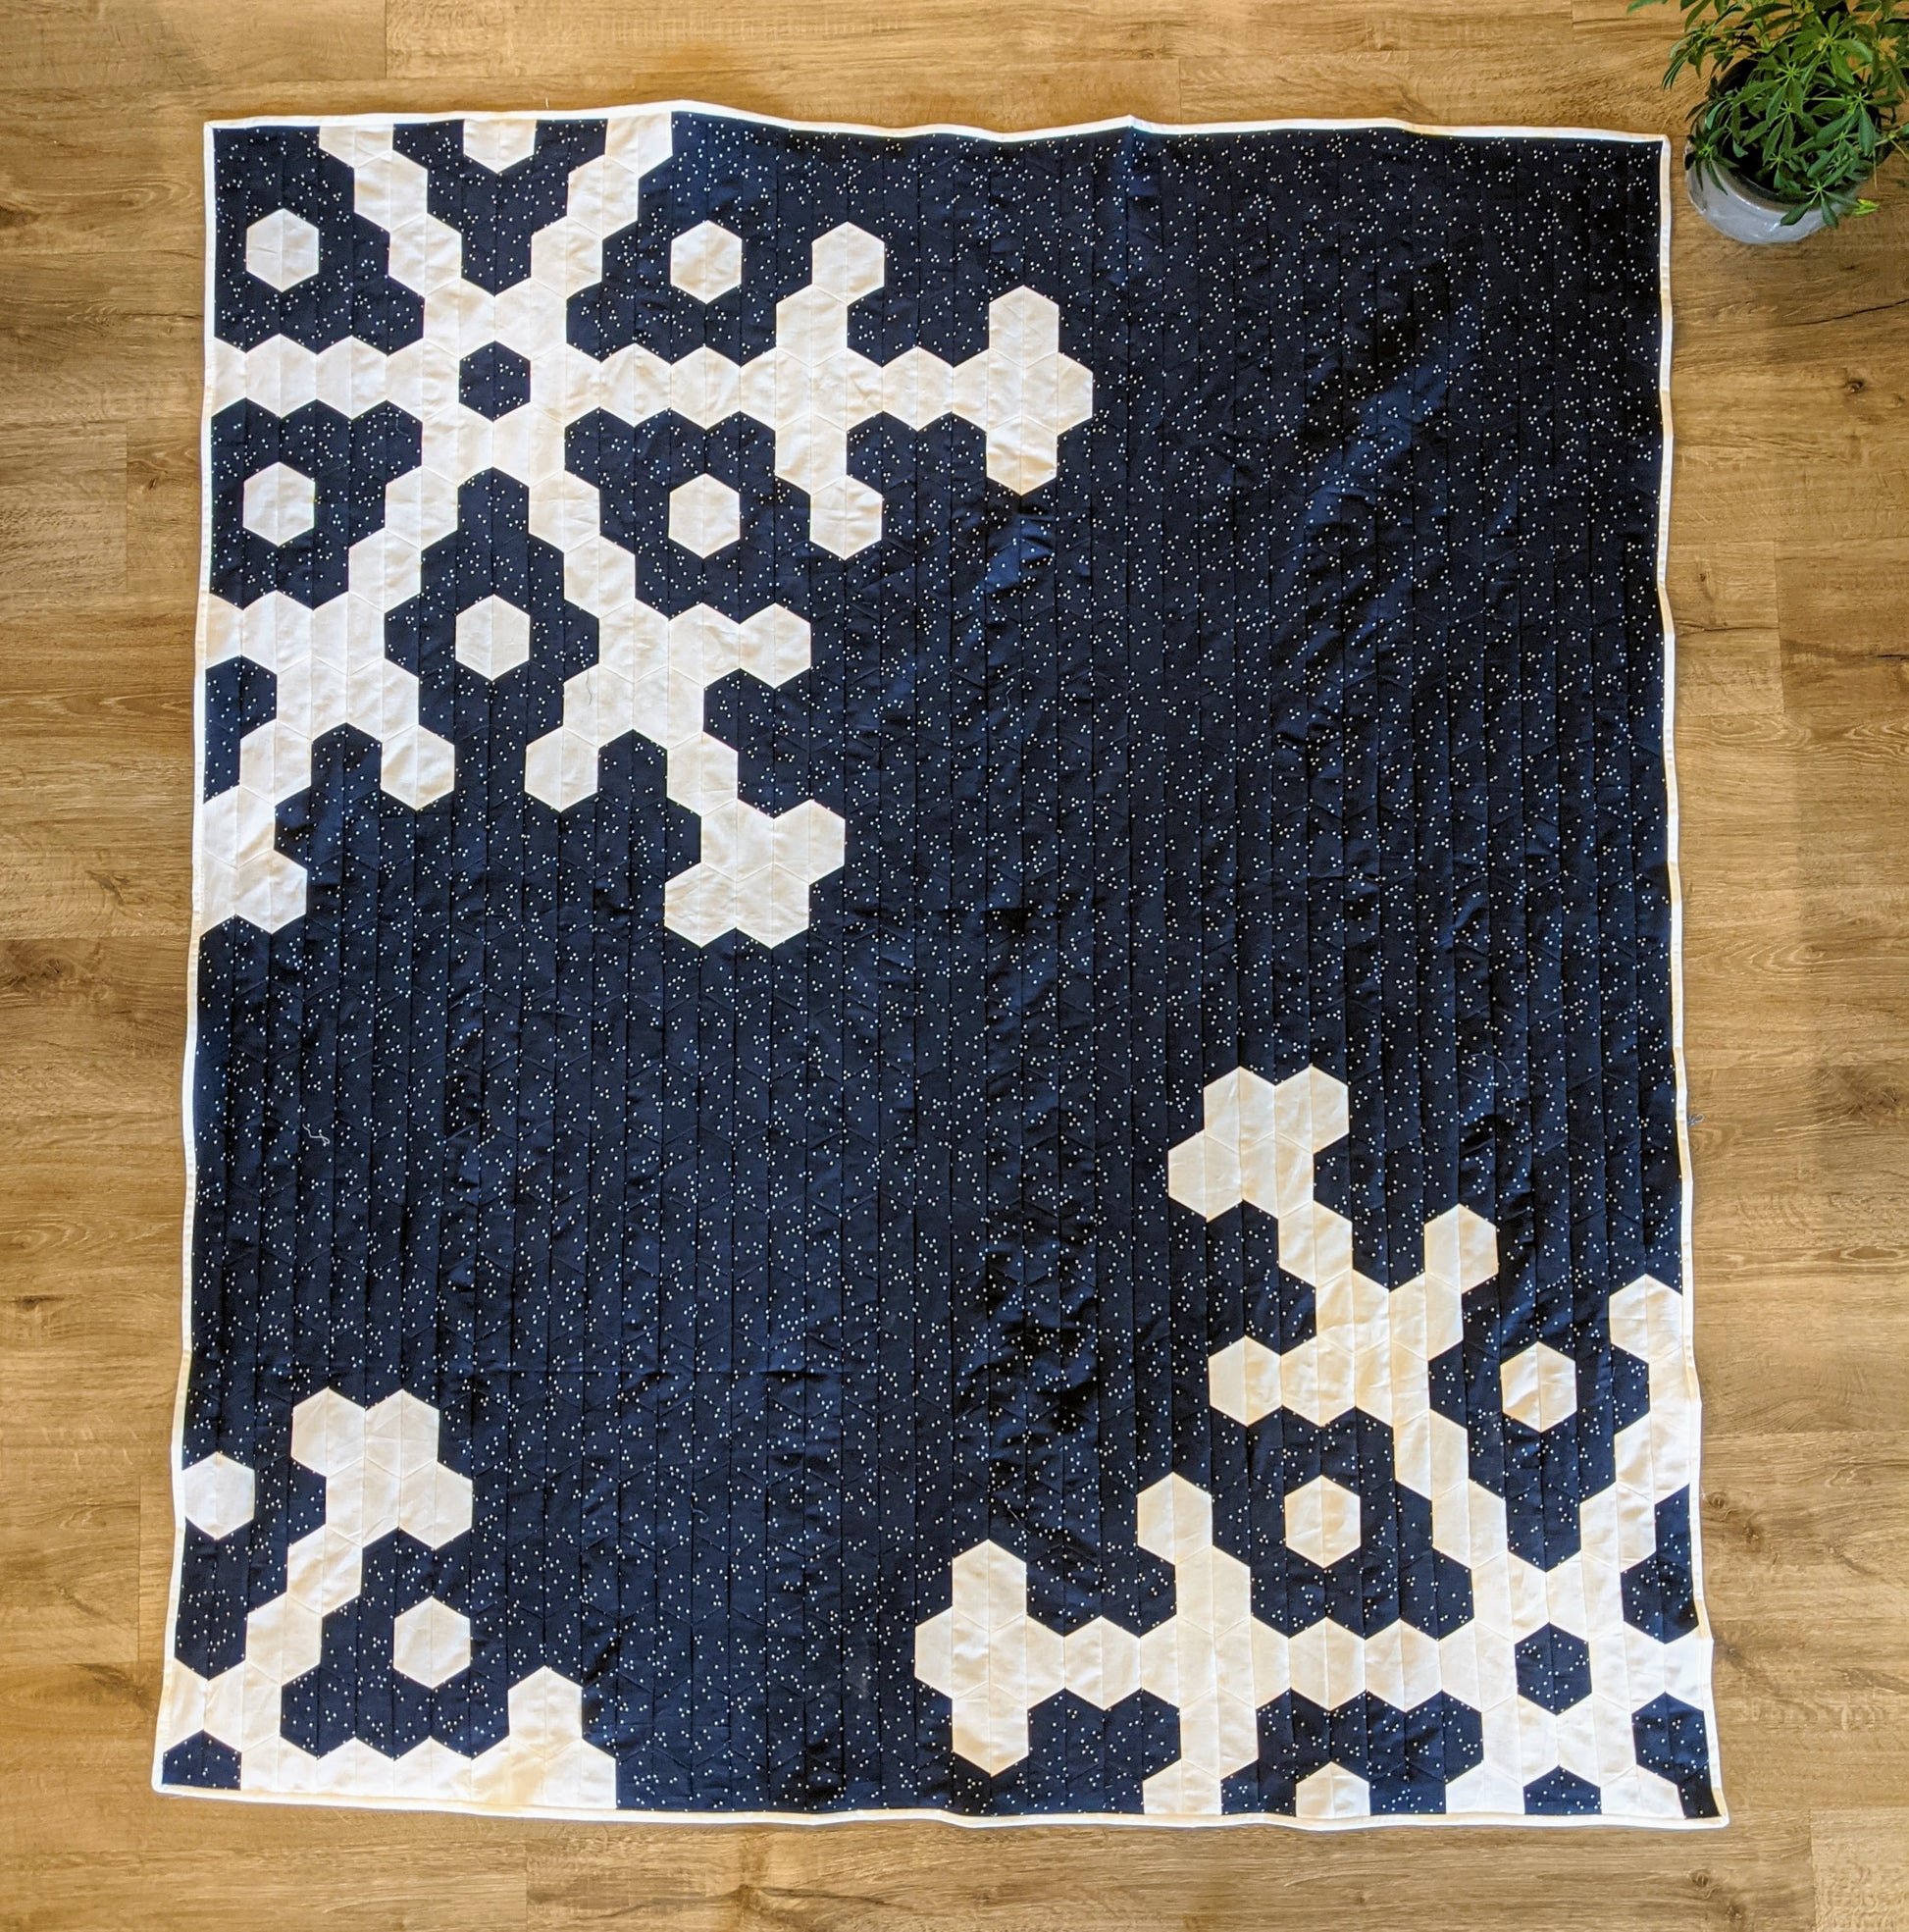 Blue and white snowflake and hexagon quilt on wood.